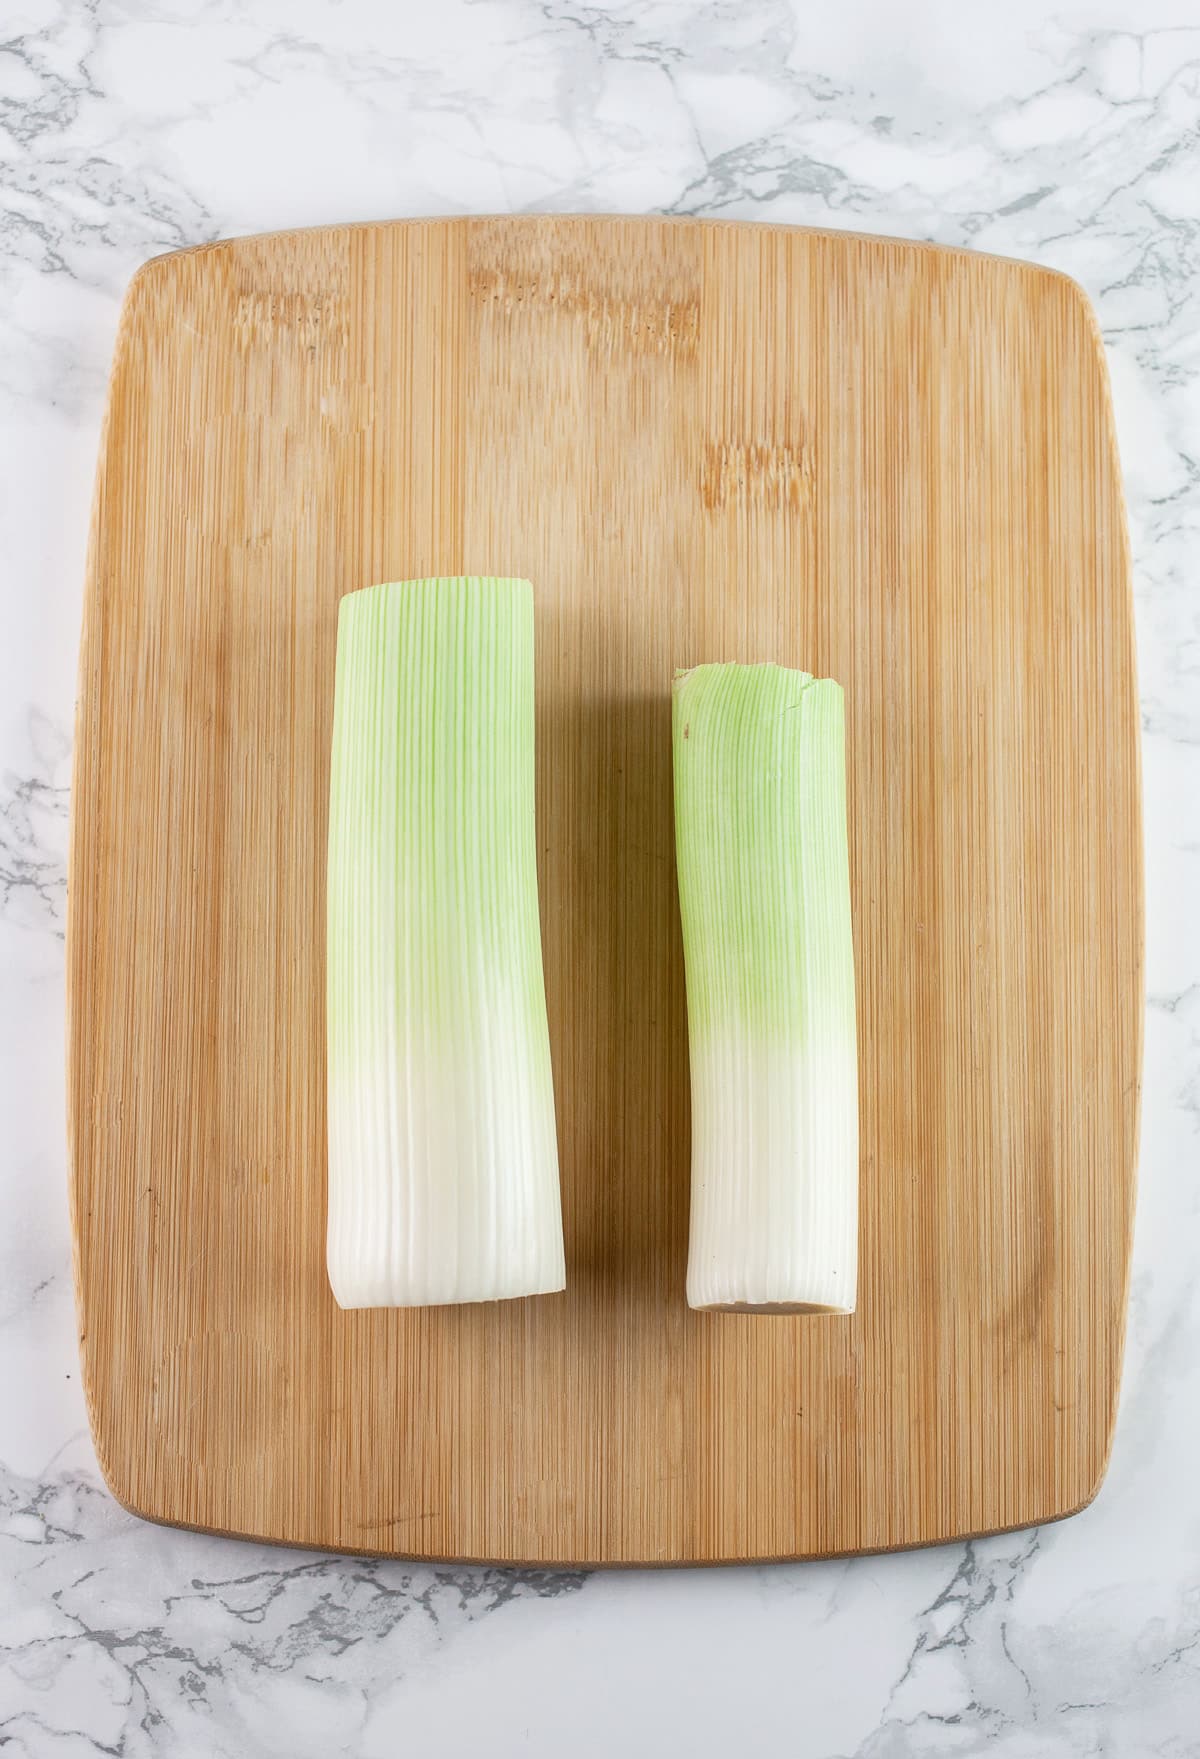 Leeks with tops and bottoms removed on wooden cutting board.